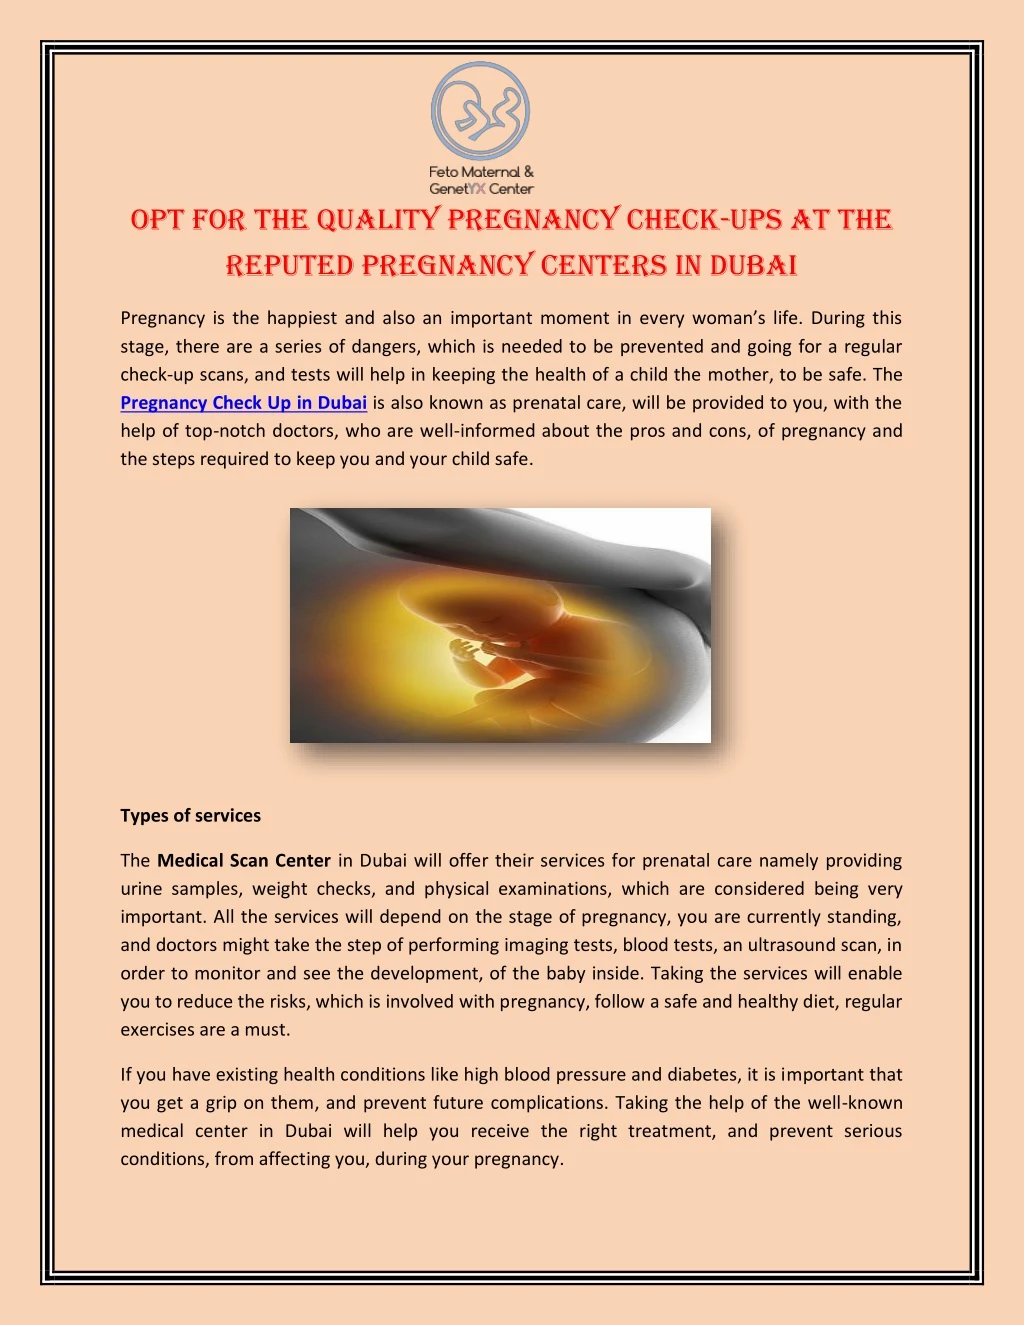 opt for the quality pregnancy check